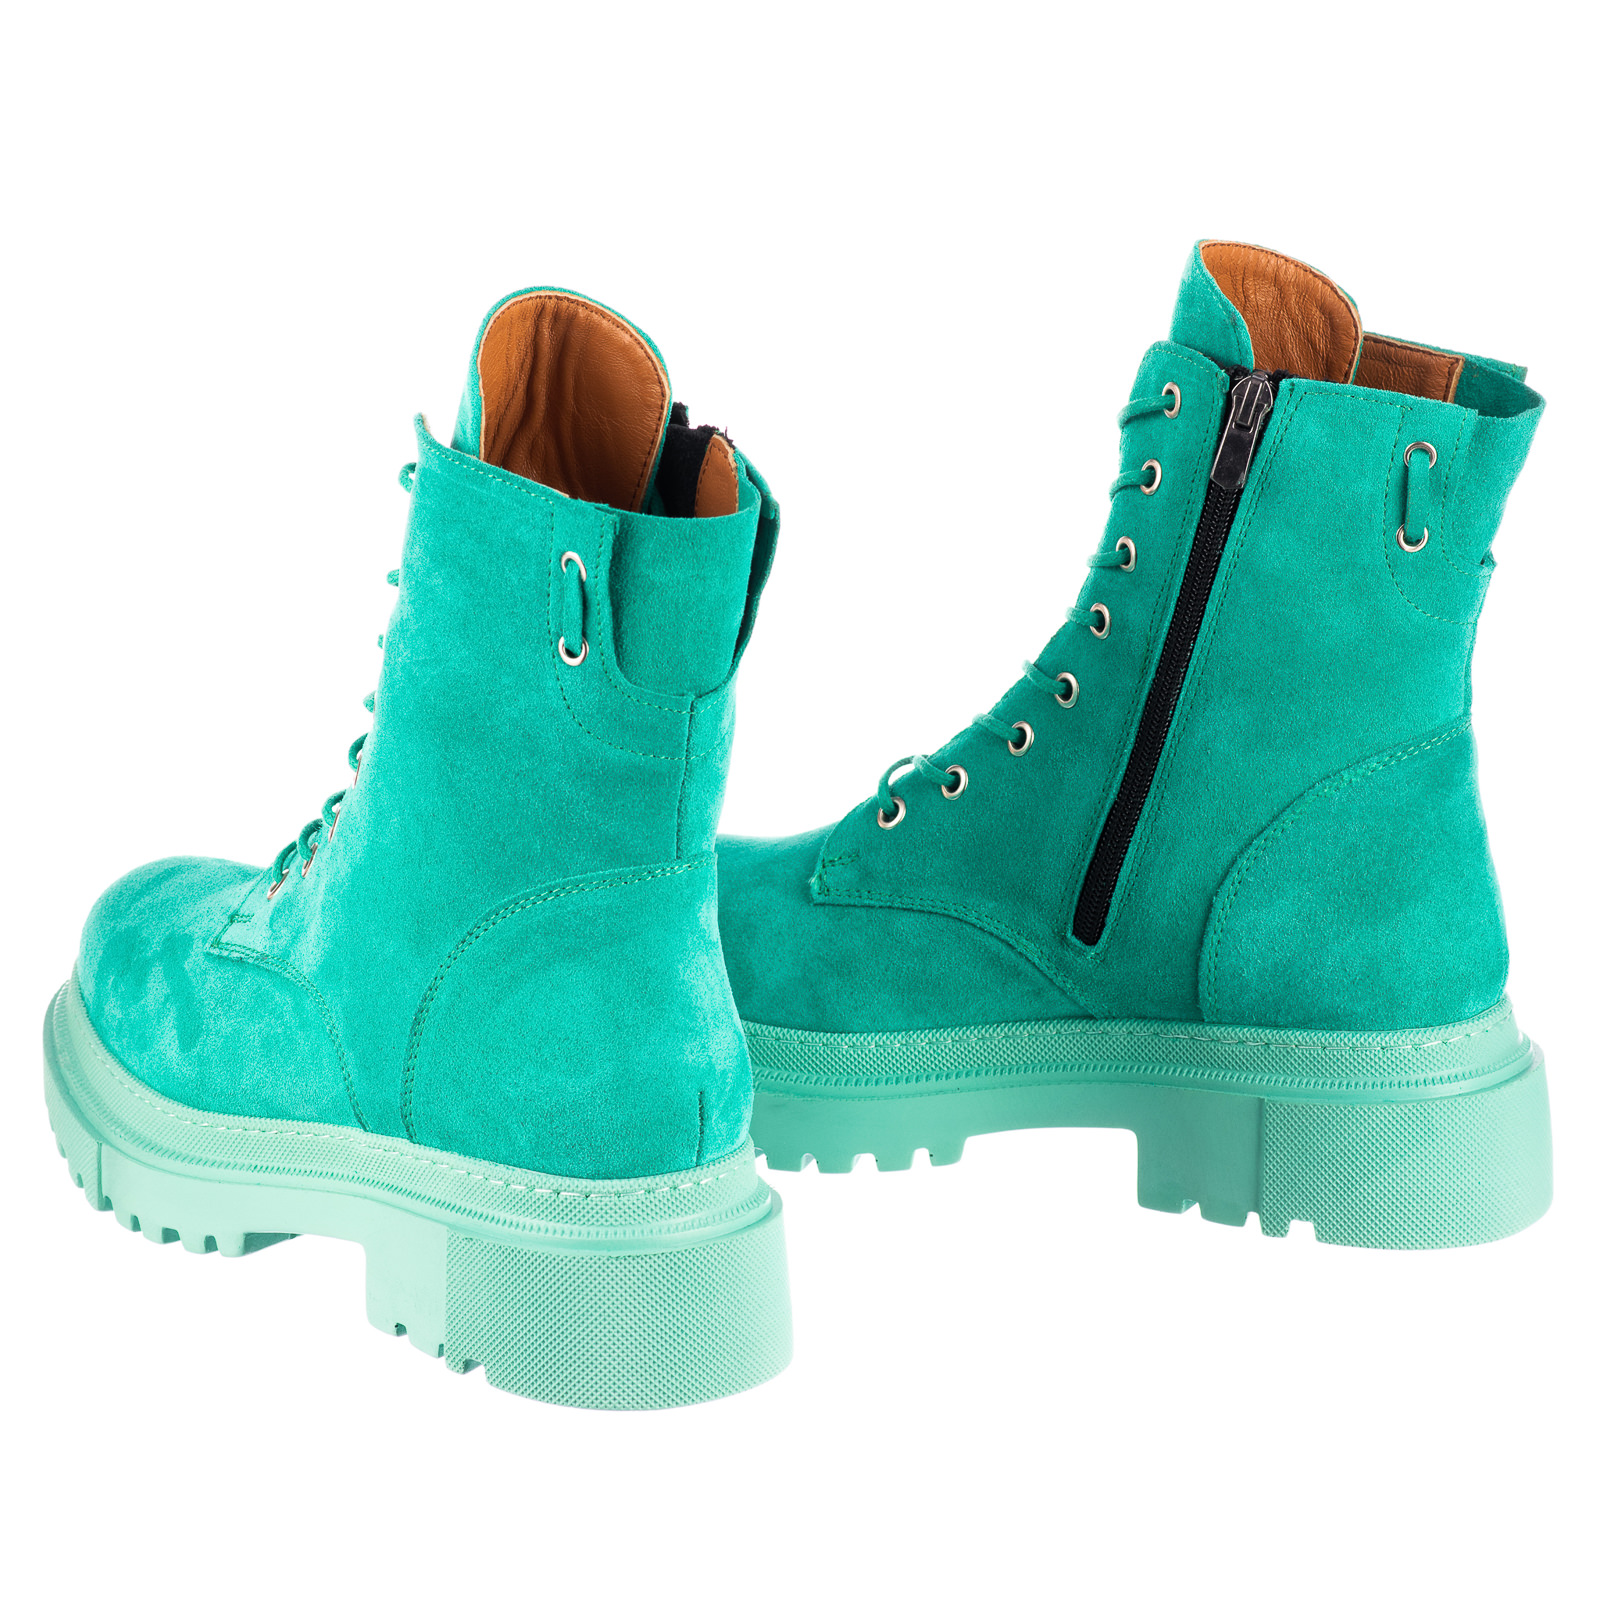 Leather booties B688 - TURQUOISE